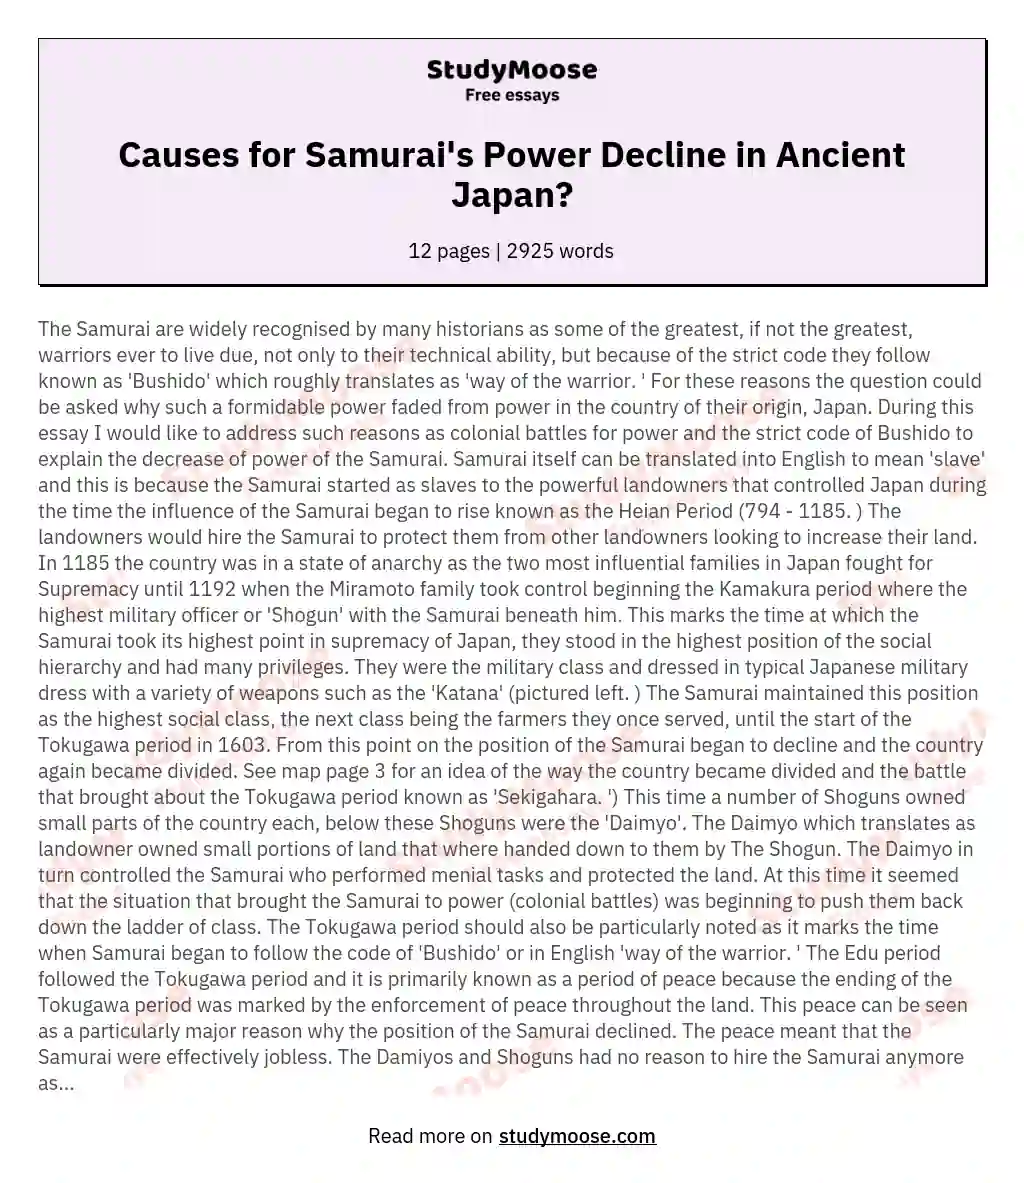 Causes for Samurai's Power Decline in Ancient Japan? essay